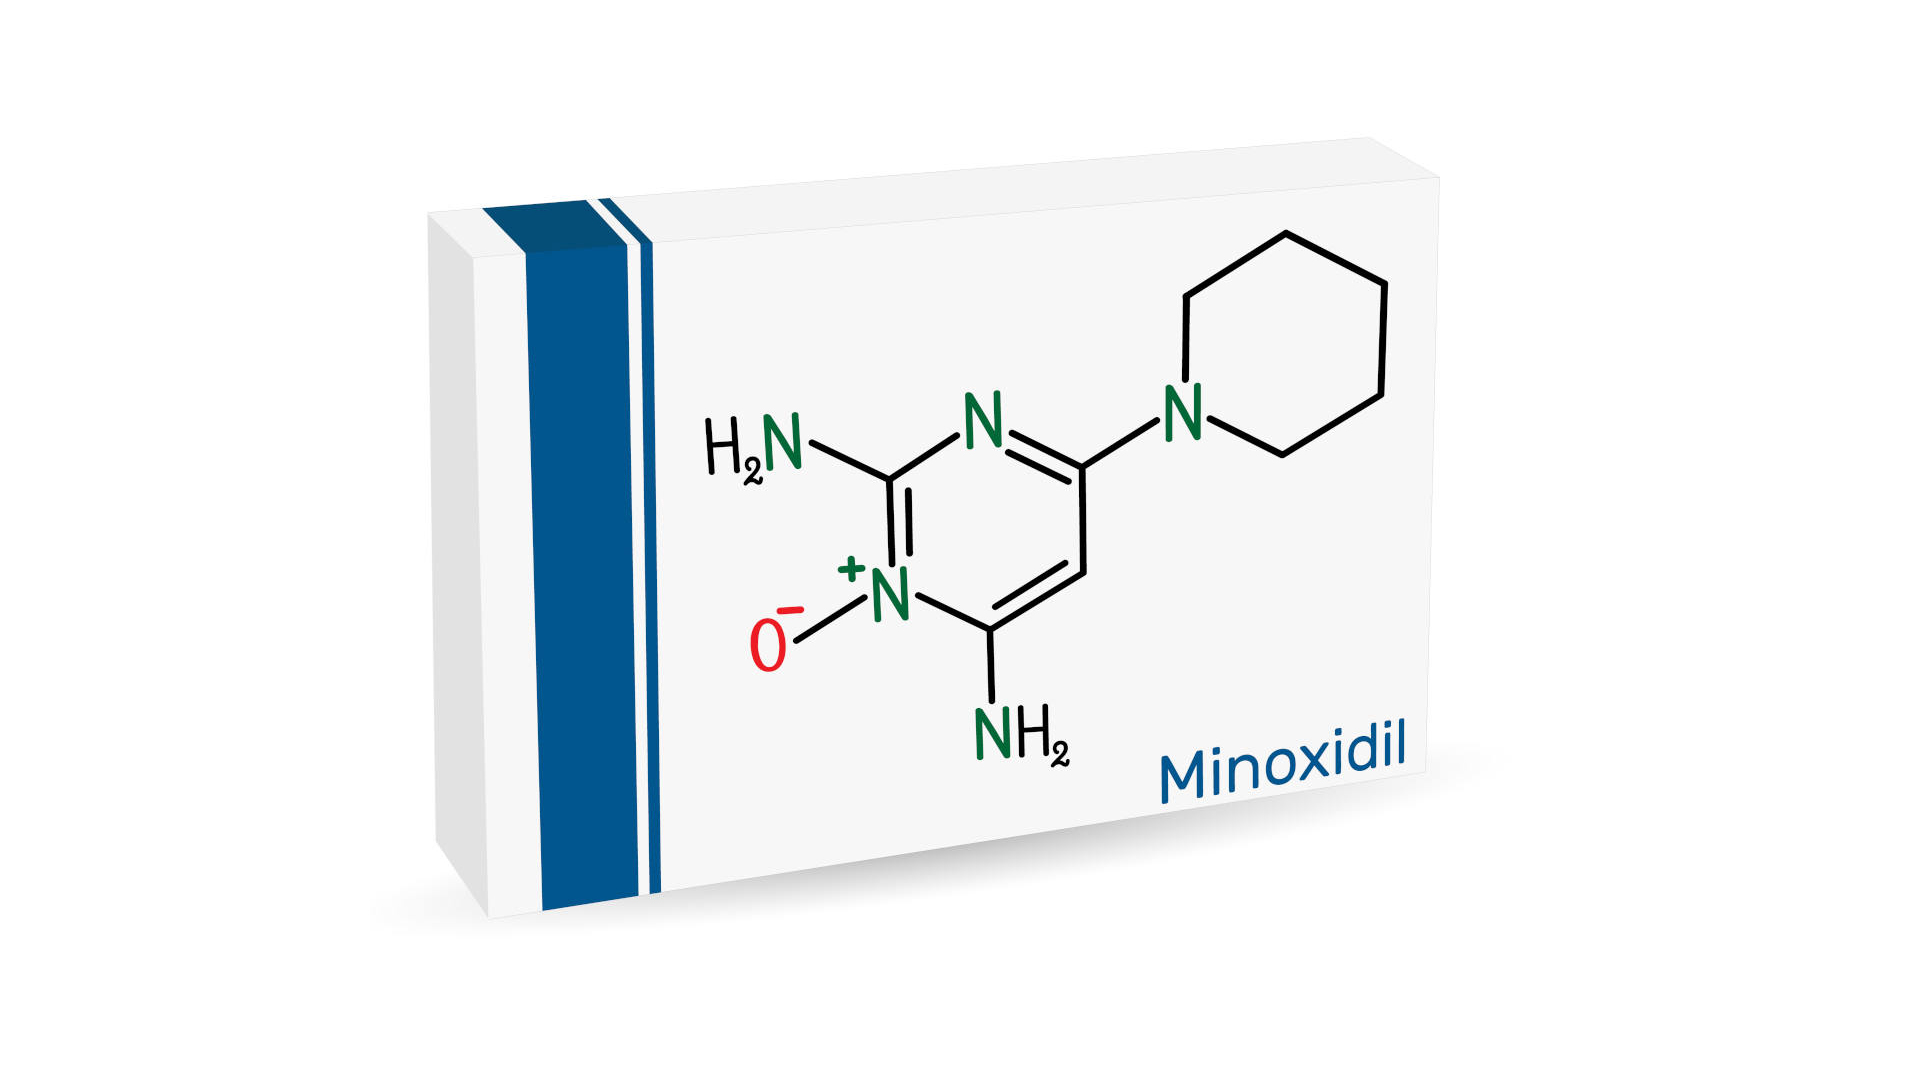 Minoxidil is subject to controversy